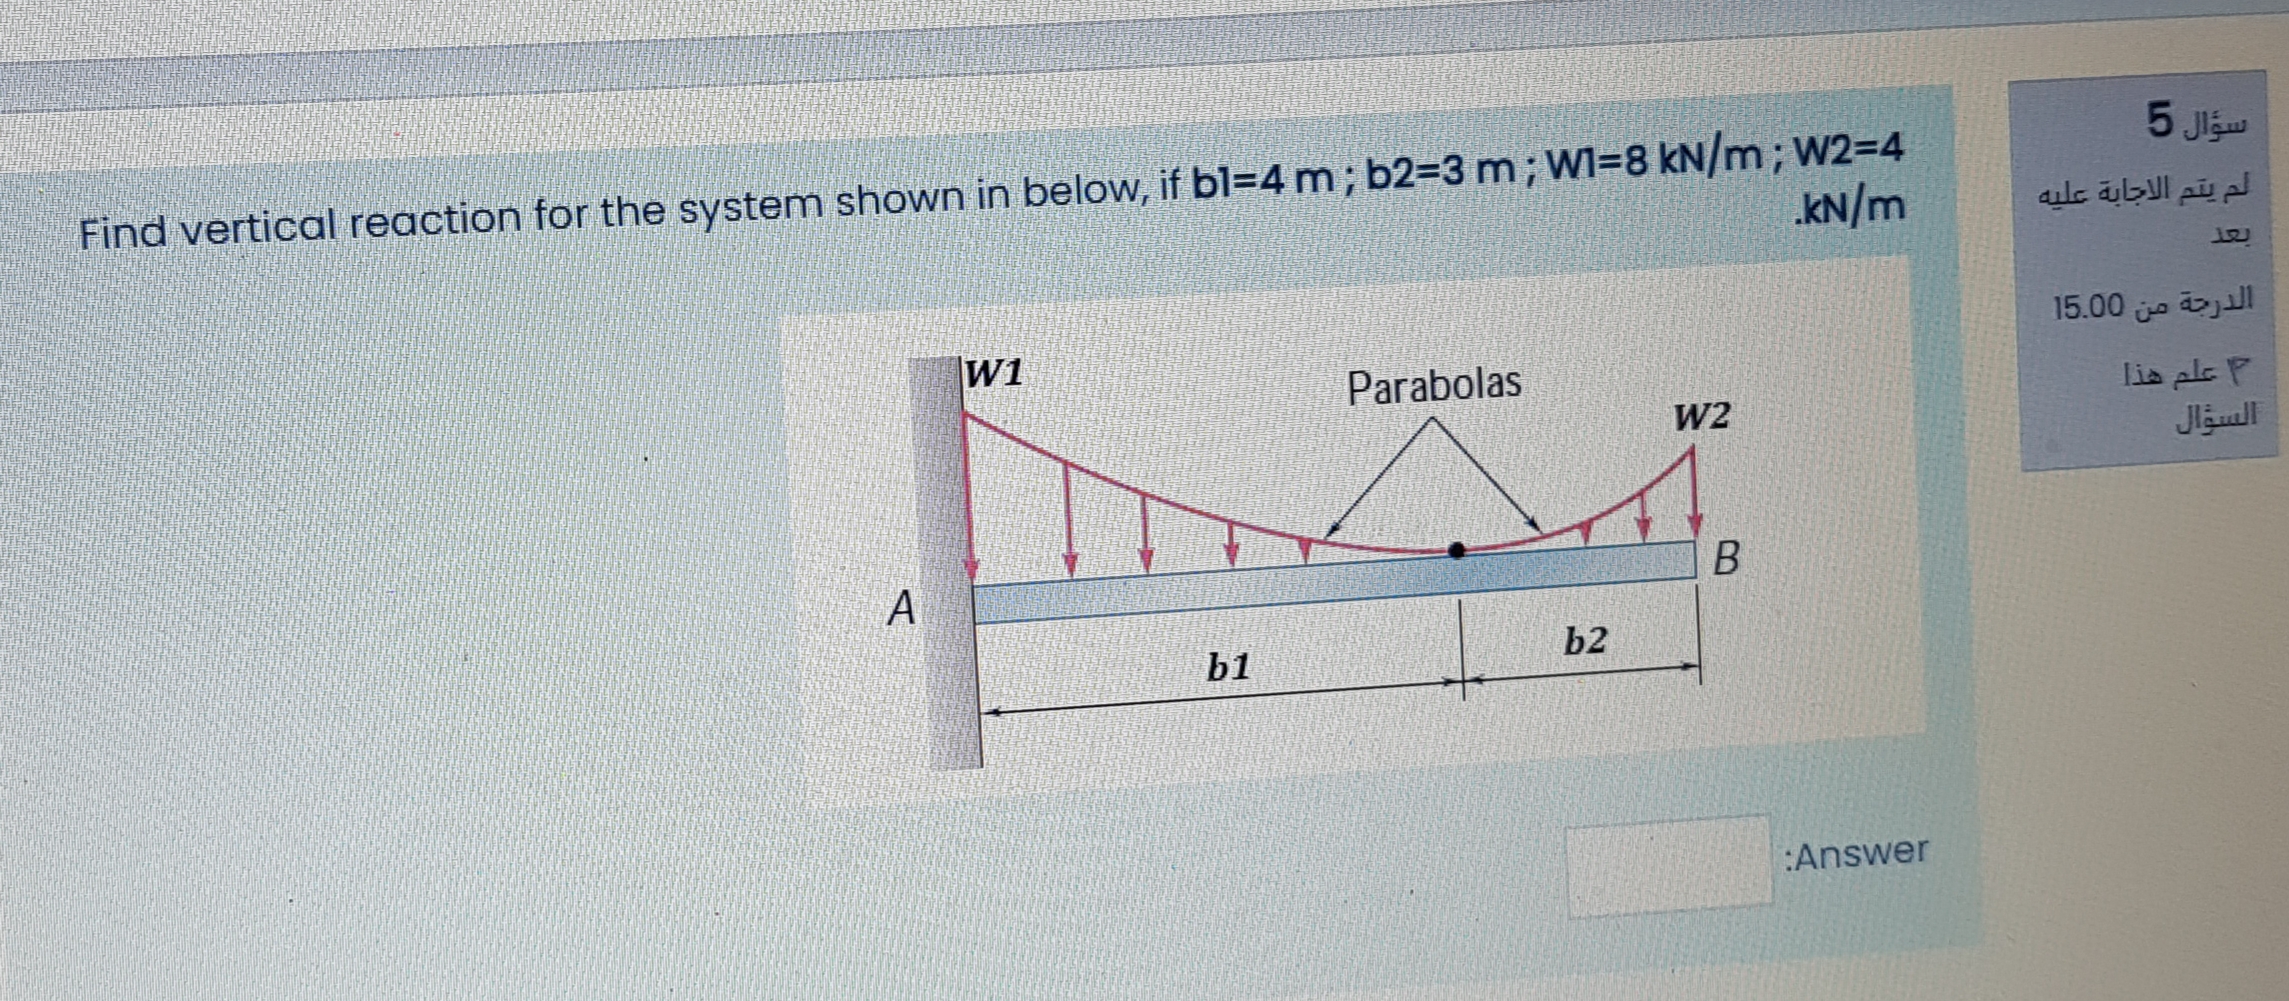 Find vertical reaction for the system shown in below, if bl=4 m ; b2=3 m; WI=8 kN/m; W2=4
kN/m
15
W1
Parabolas
W2
A
b2
b1
:Answer
